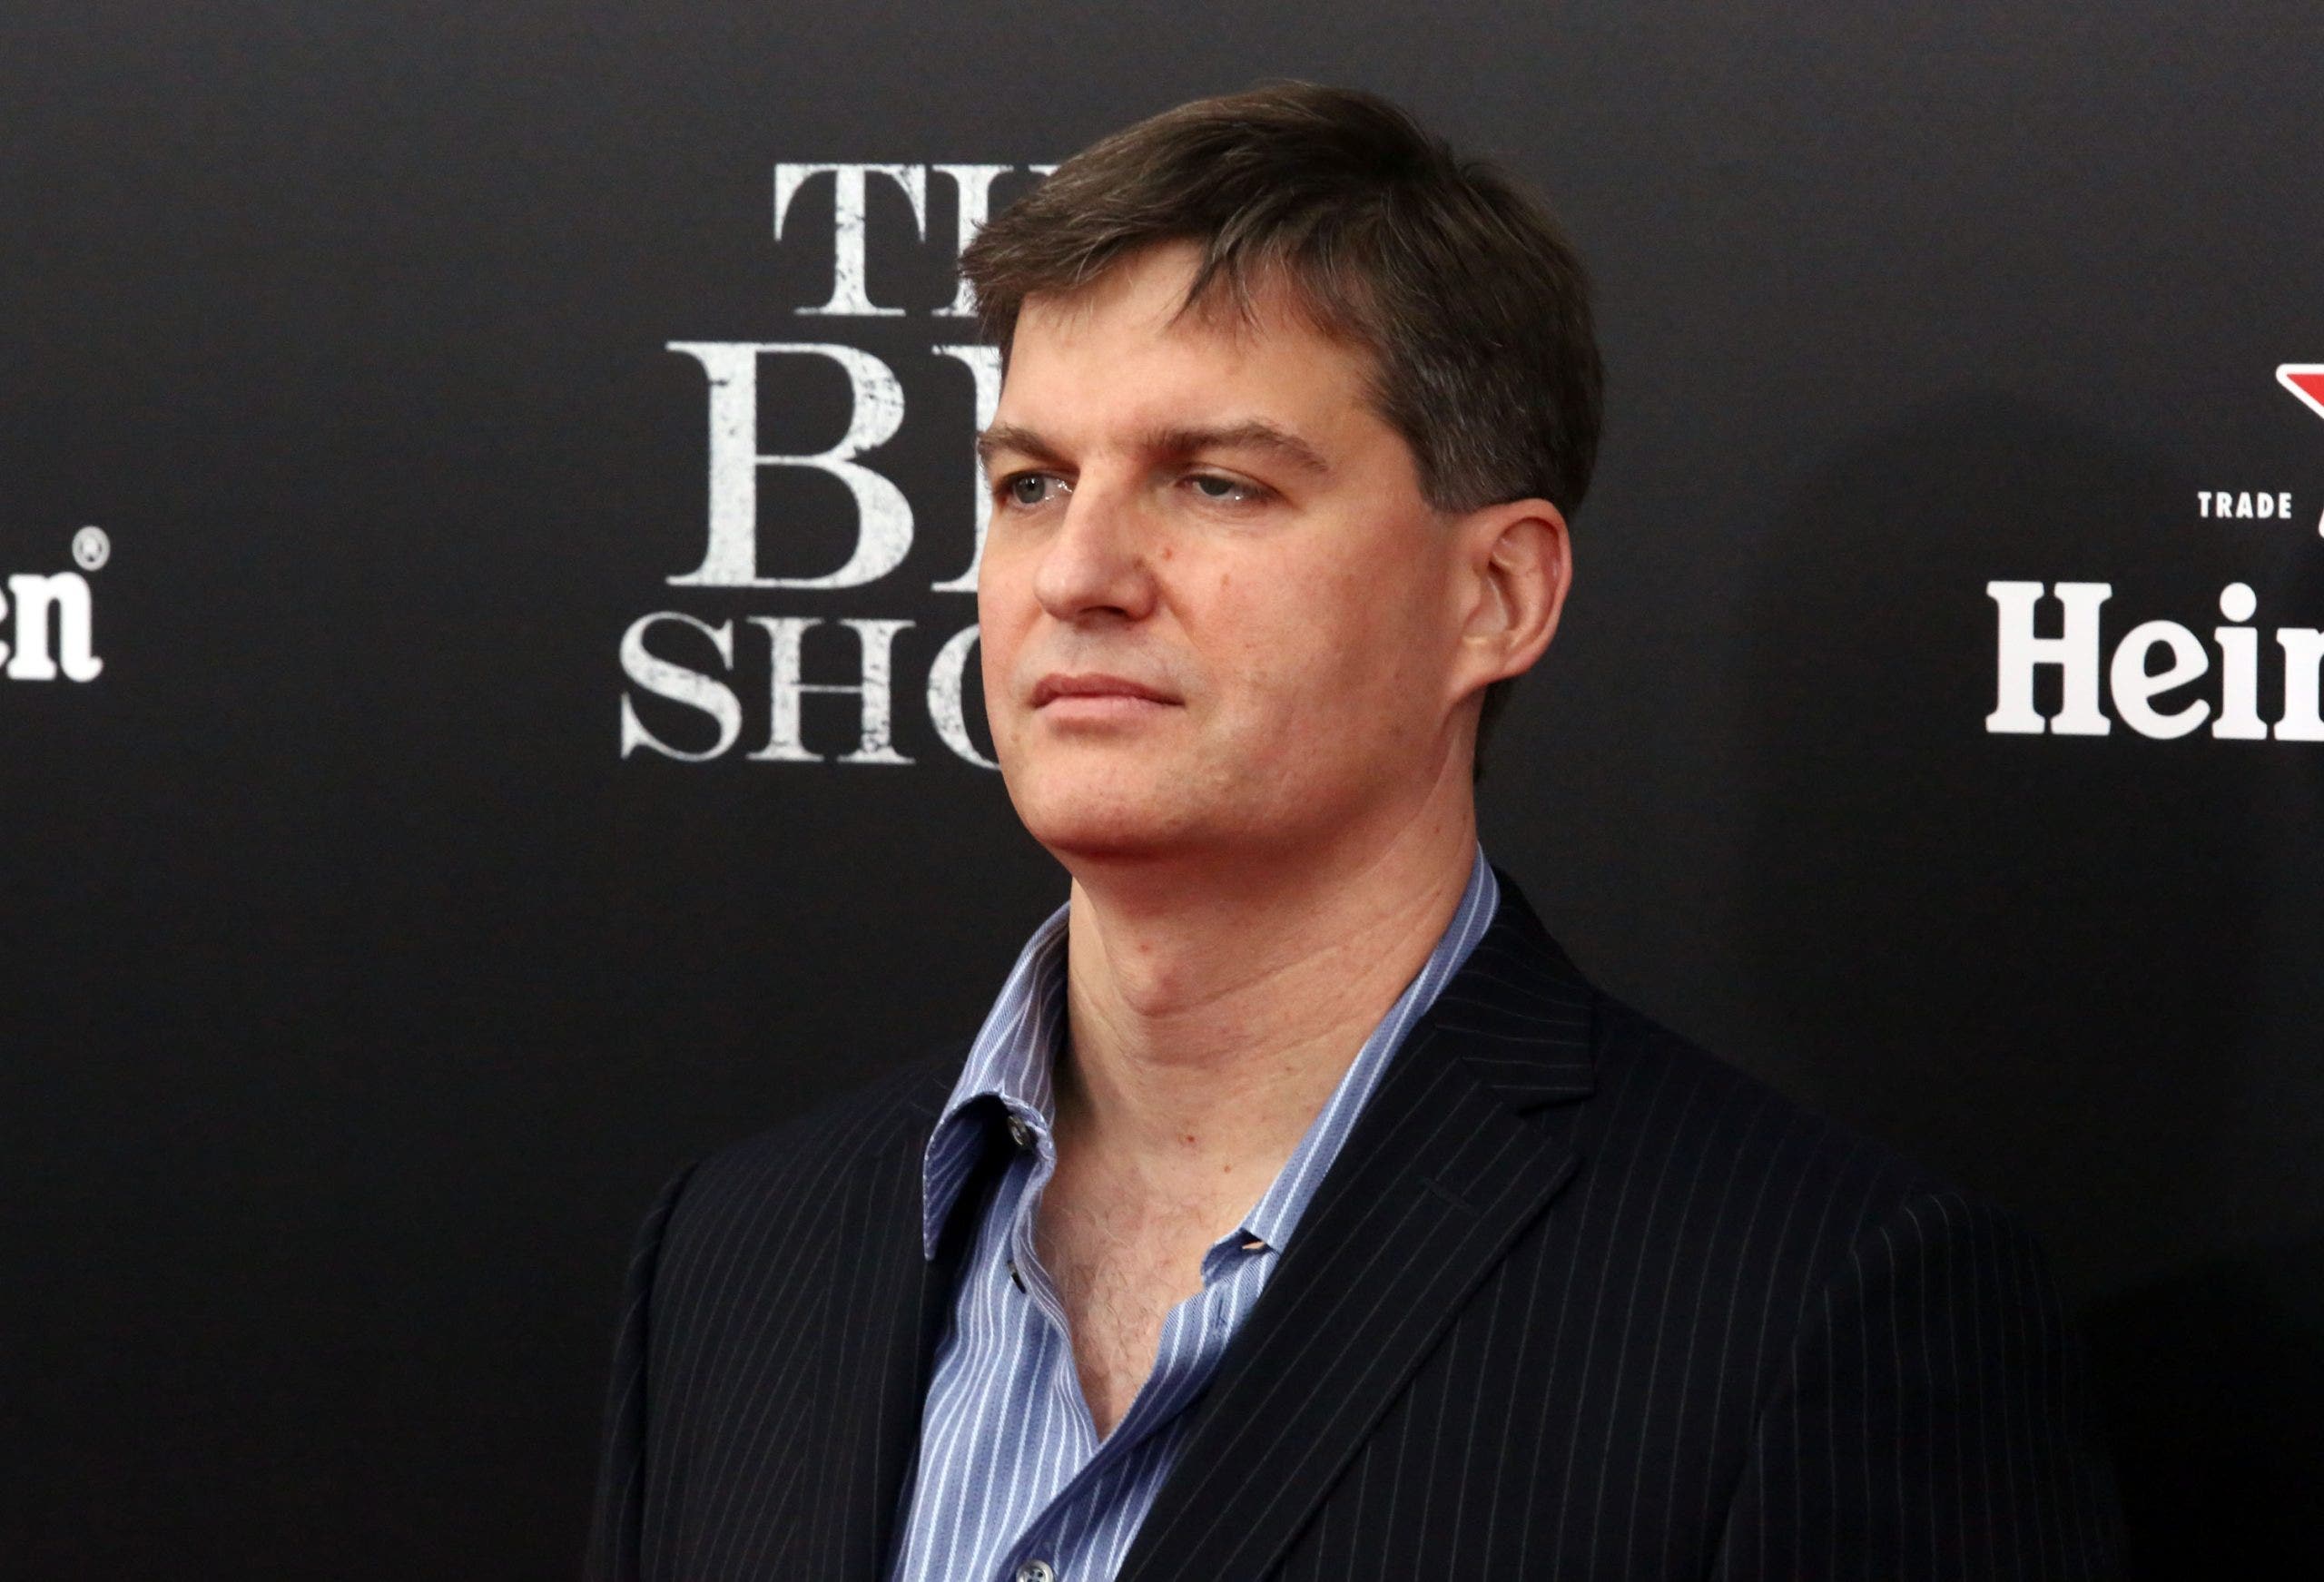 Who is Michael Burry? ‘The Big Short’ Investor and hedge fund manager [Video]